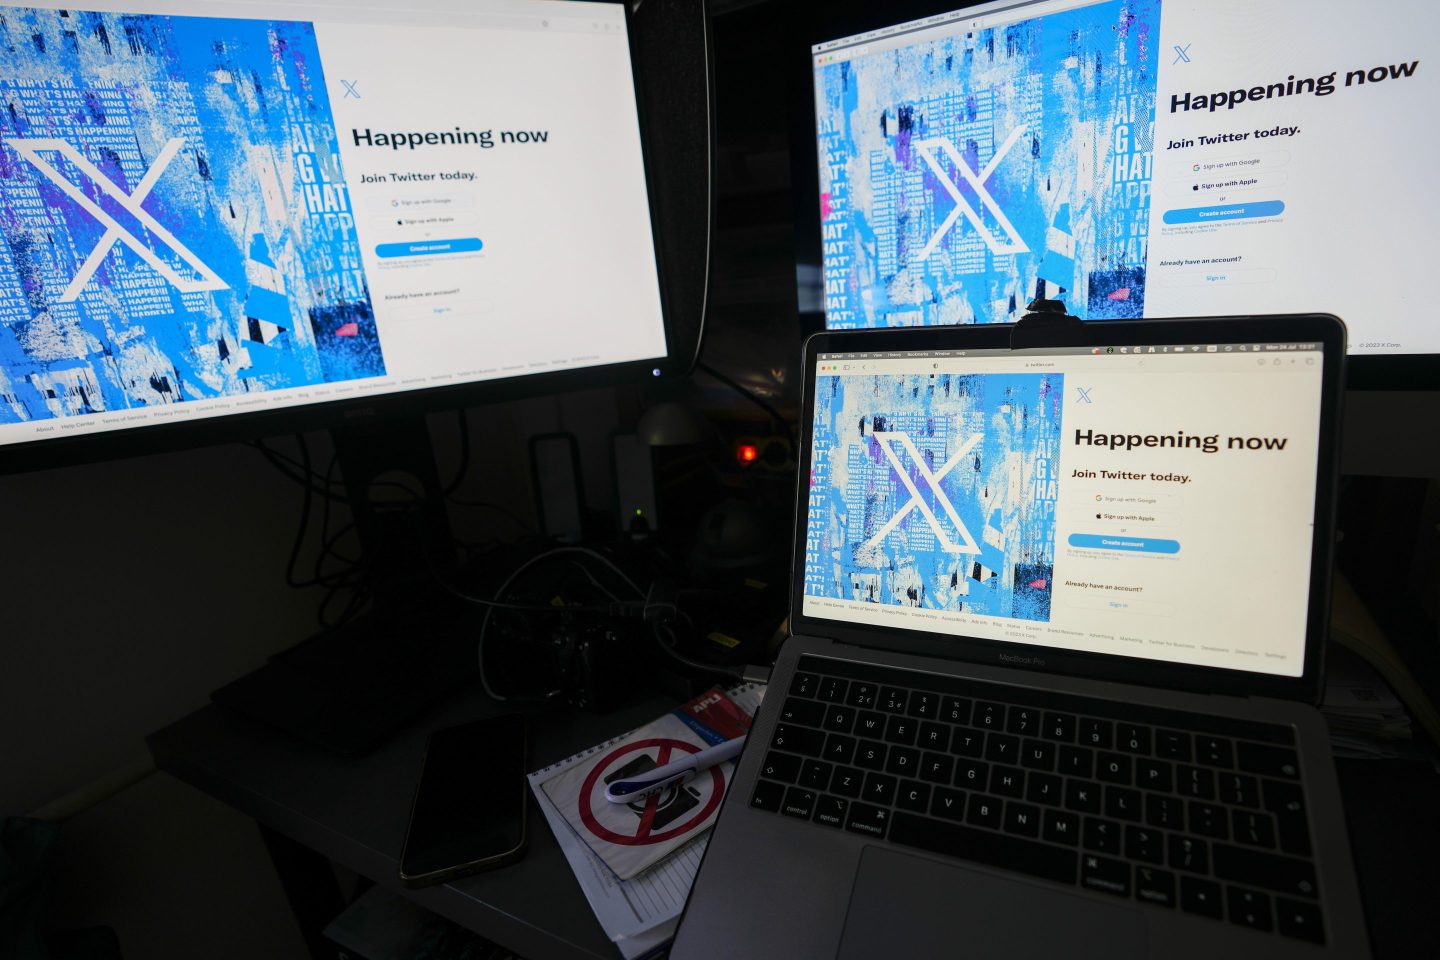 FILE &#8211; Computer monitors and a laptop display the X, formerly known as Twitter, sign-in page, July 24, 2023, in Belgrade, Serbia. Attorneys for X Corp. and a research organization that studies online hate speech traded arguments in court Thursday, Feb. 29, 2024, after the social media platform sued the non-profit Center for Countering Digital Hate for documenting the recent increase in hate speech on the site since it was purchased by Elon Musk. (AP Photo/Darko Vojinovic, File)